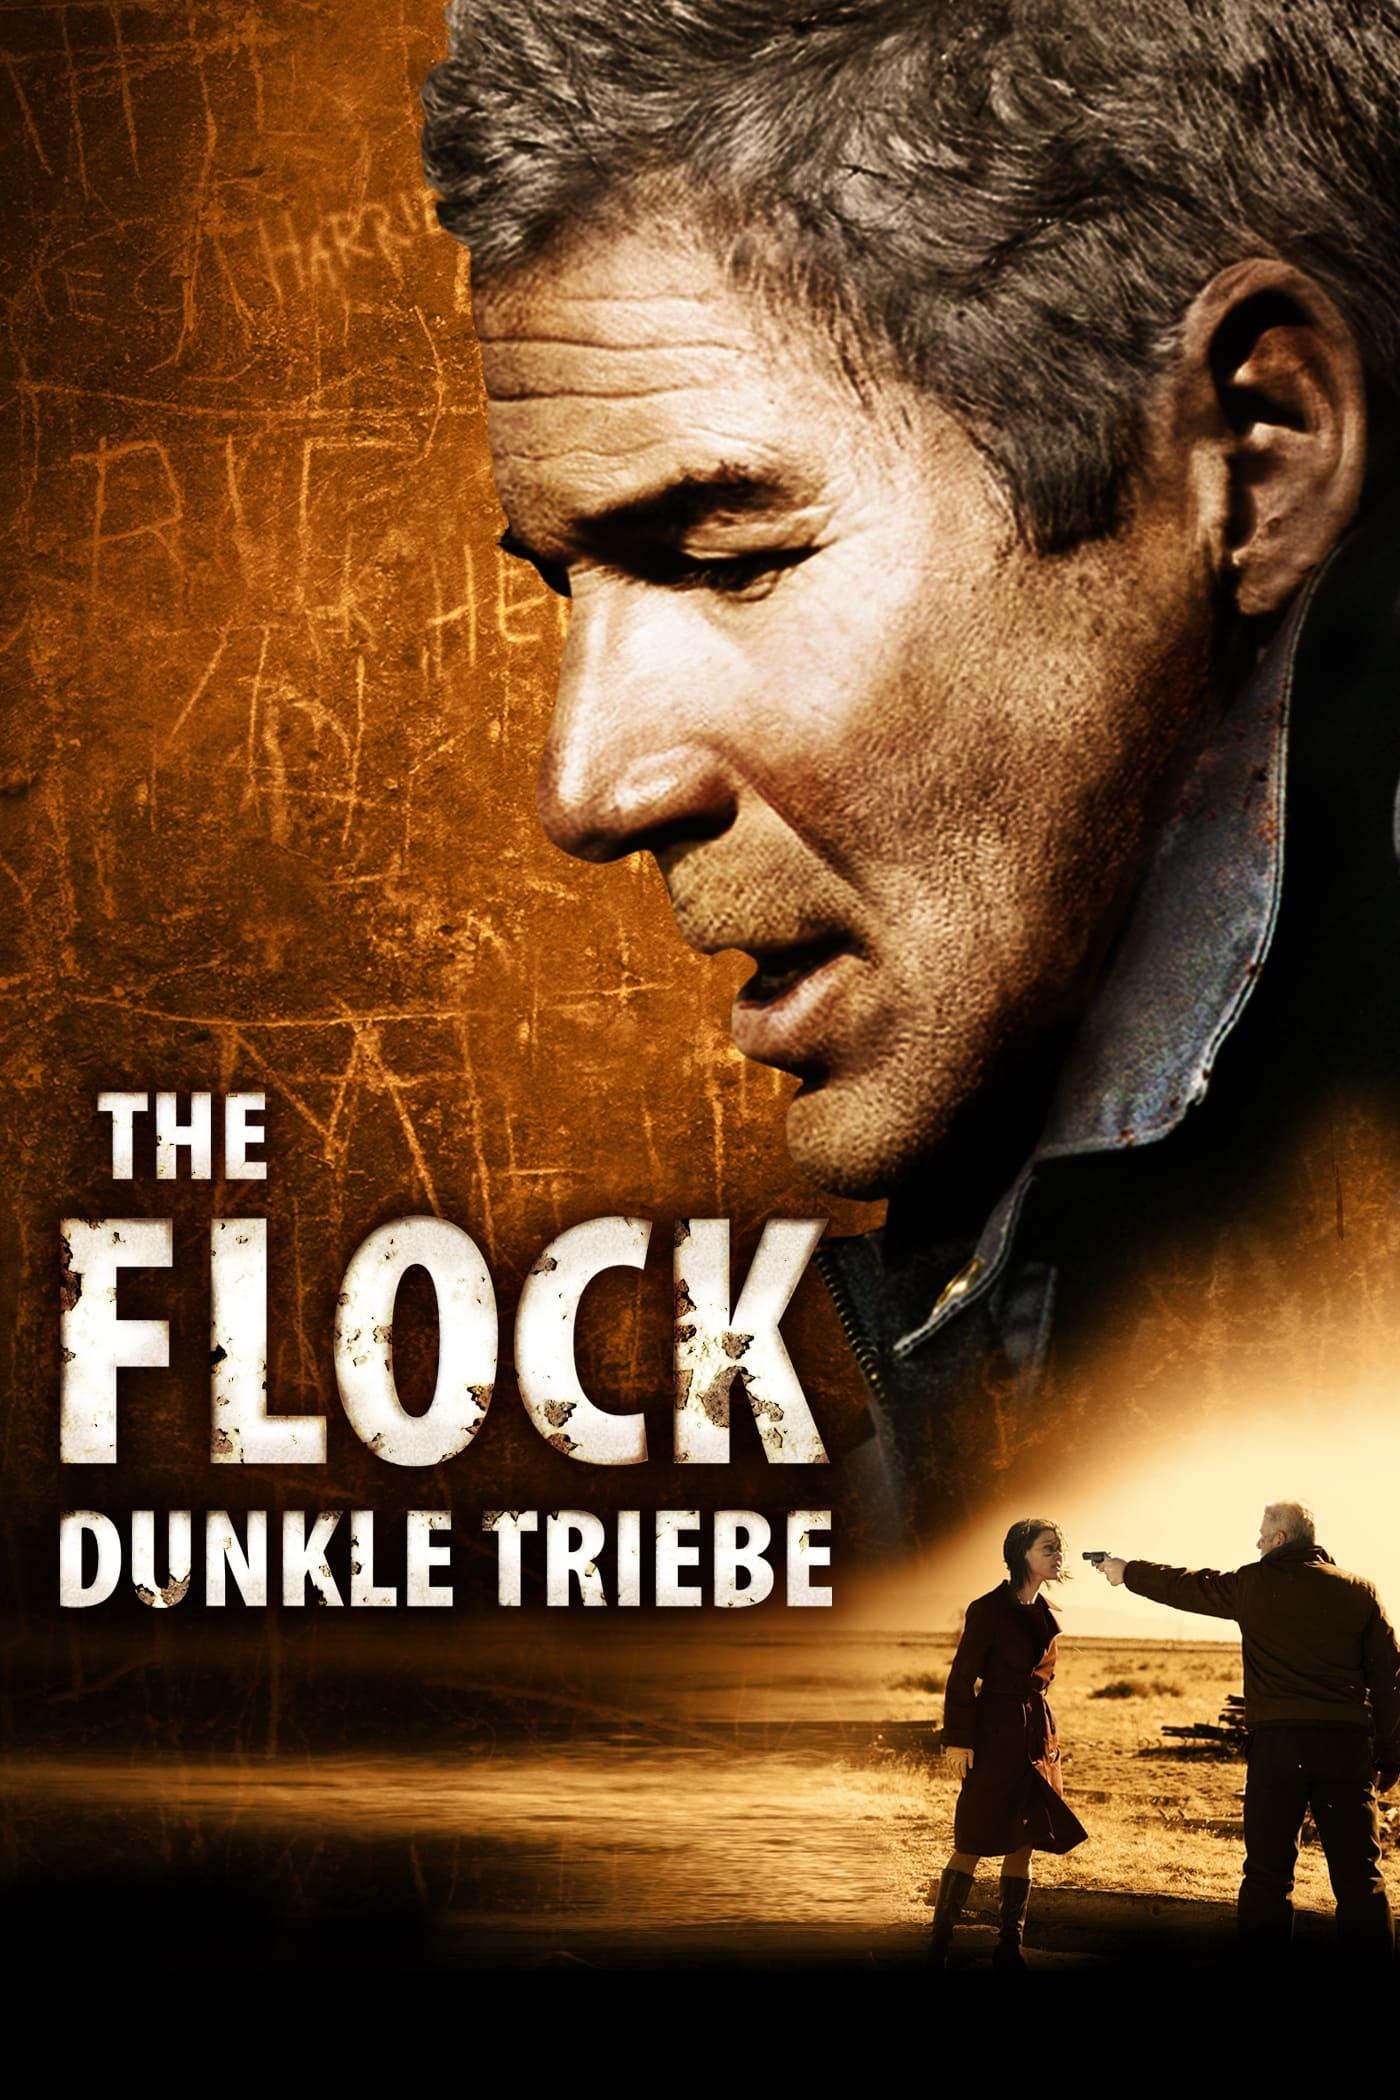 The Flock - Dunkle Triebe poster